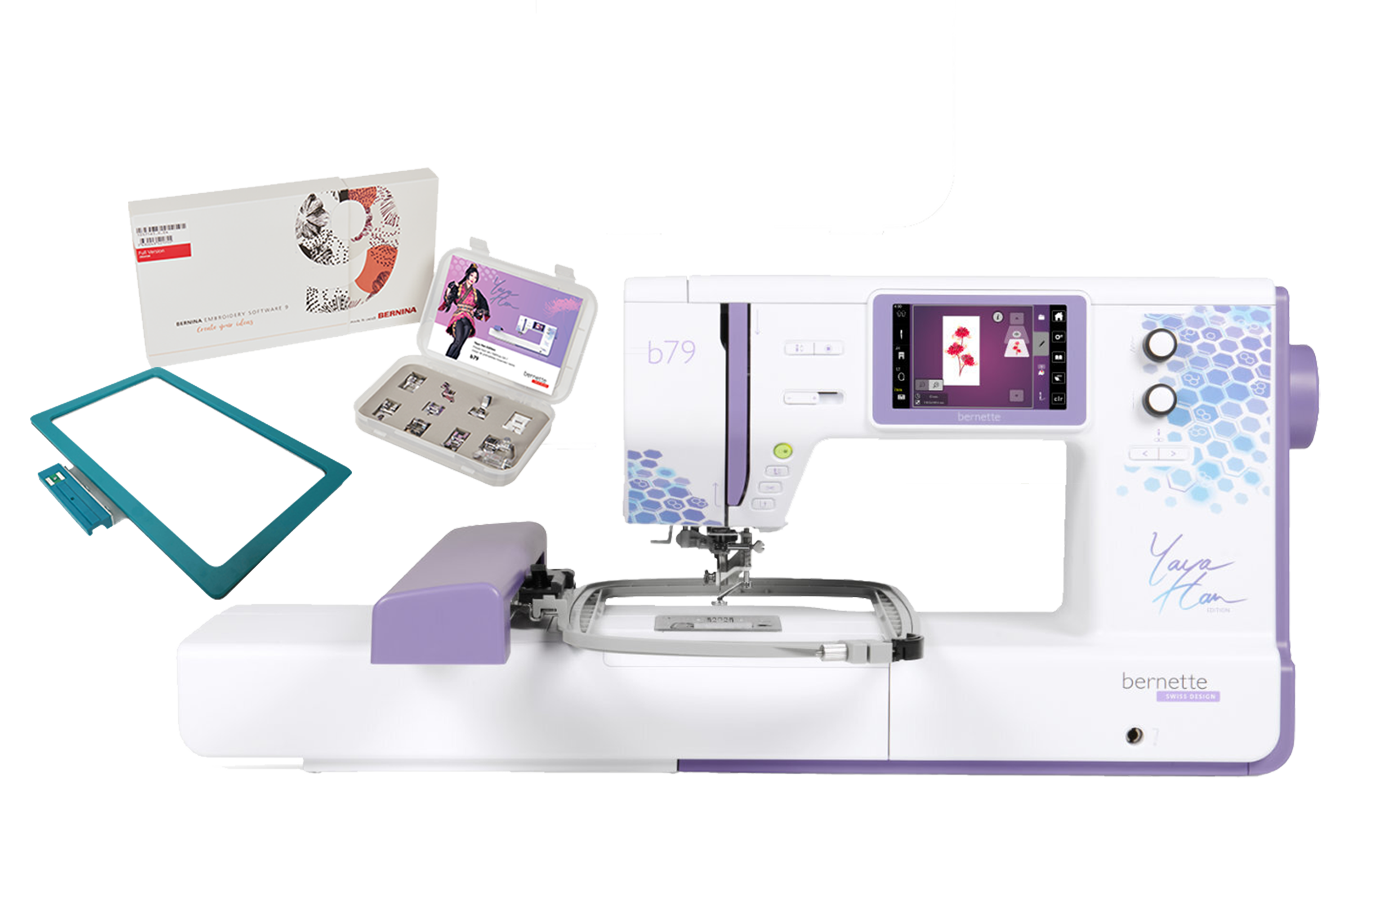 Bernette b79 Yaya Han Special Edition Sewing and Embroidery Machine 10x6 for Sale at World Weidner